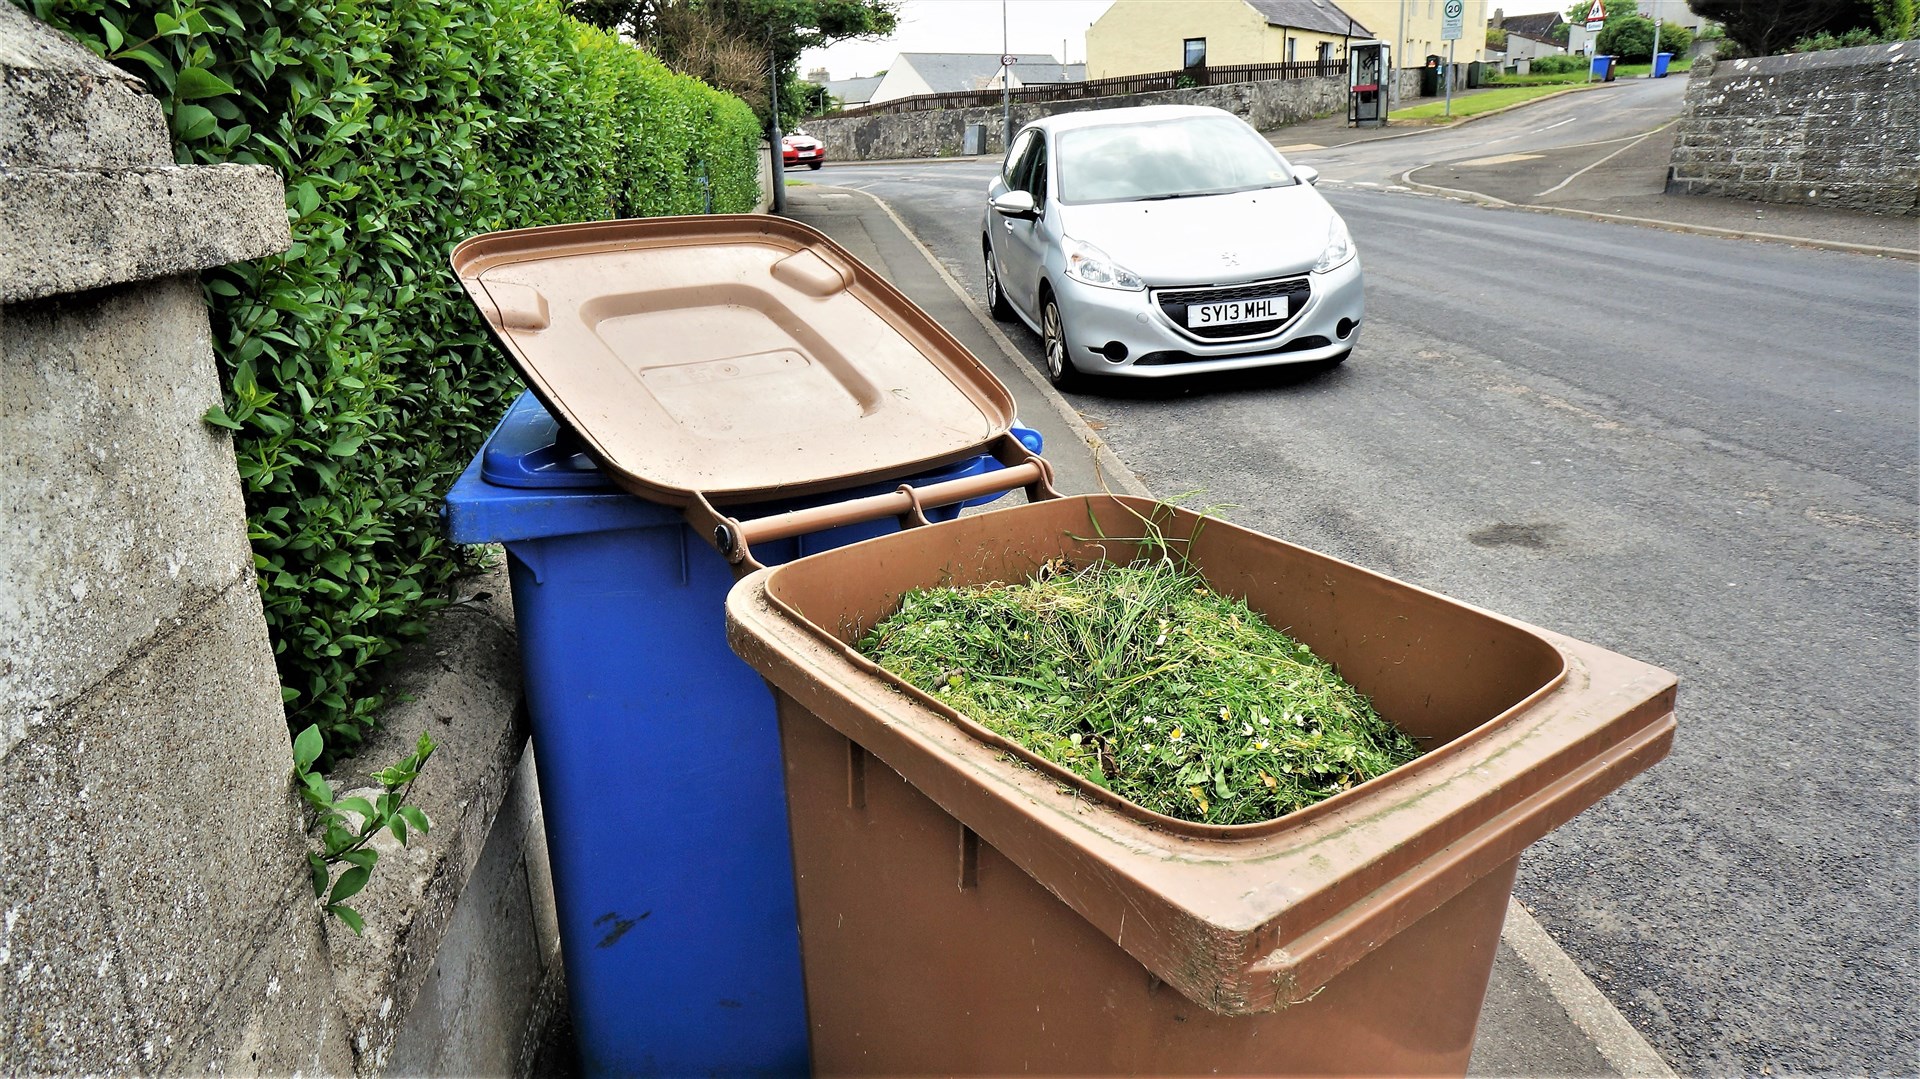 Garden waste collection is not a statutory duty for Highland Council prompting the permit system costing £47.75 a year. The service stops for three months in winter.